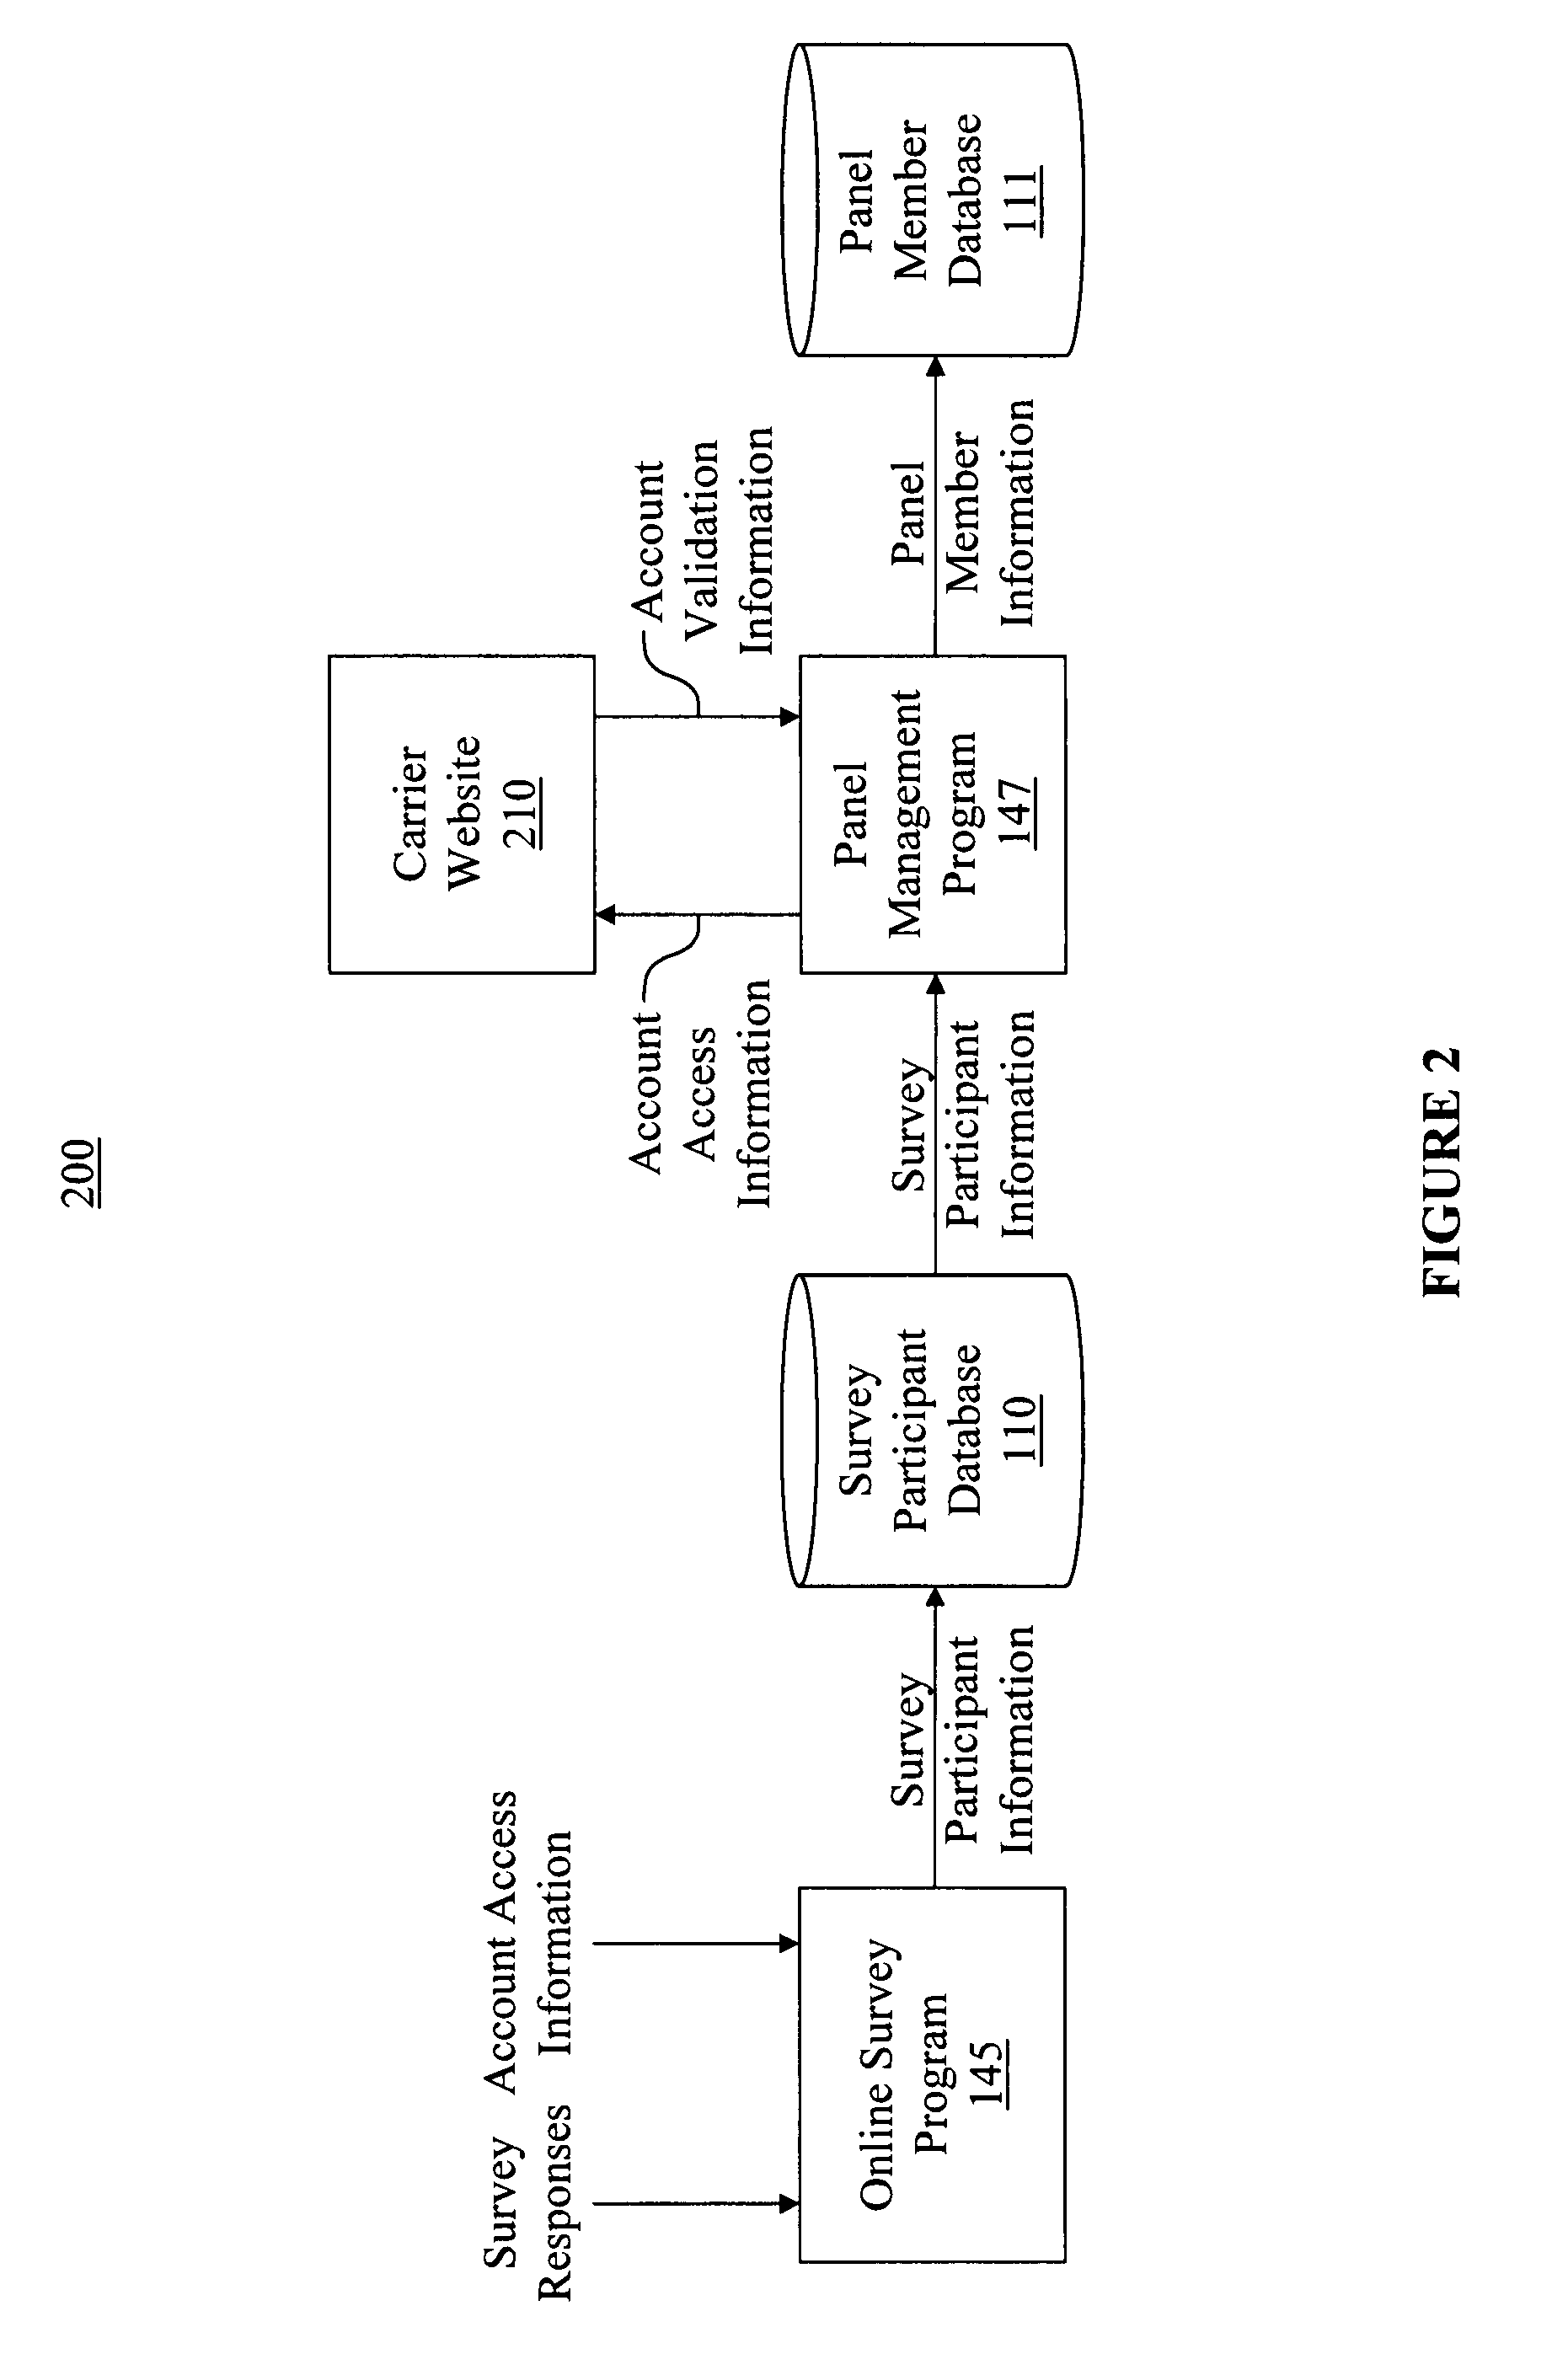 Method and system for providing market analysis for wireless data markets